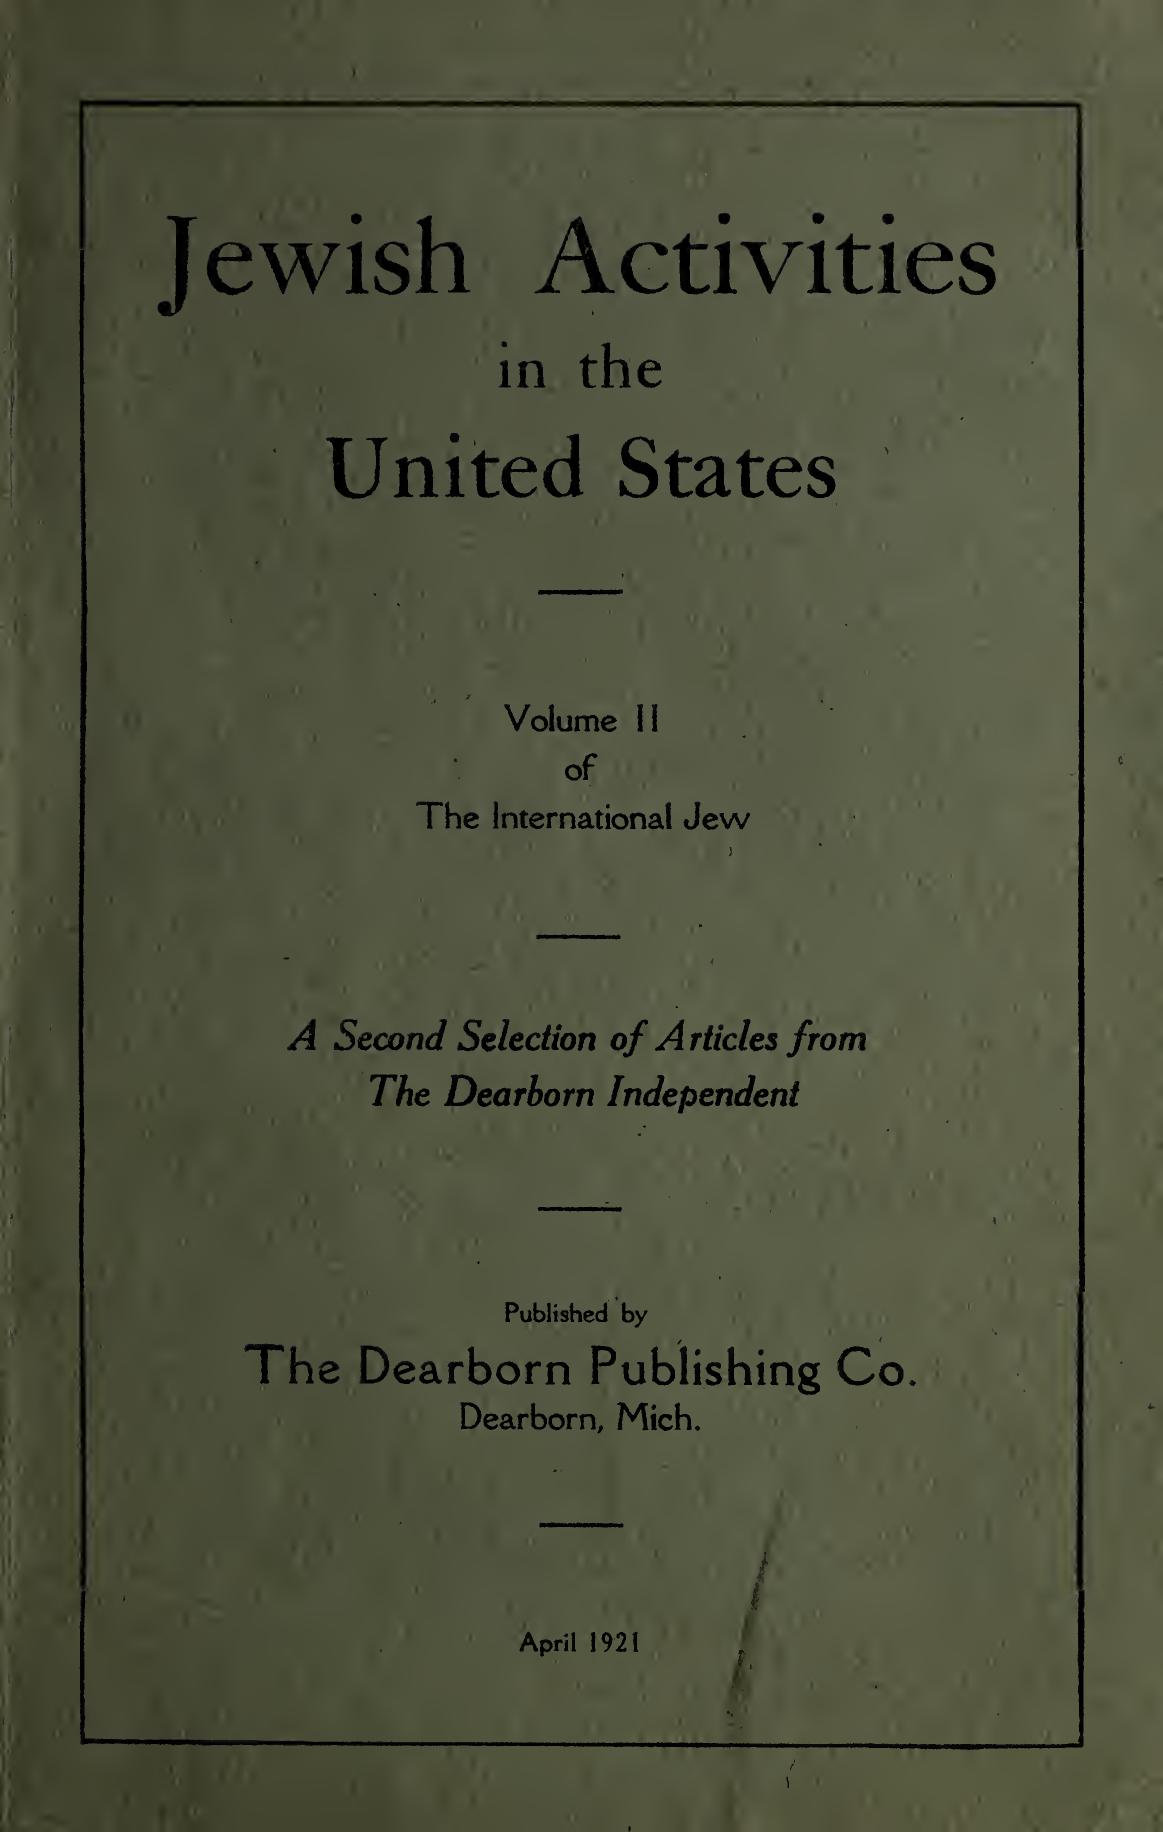 The International Jew - Volume II (1921) by Henry Ford